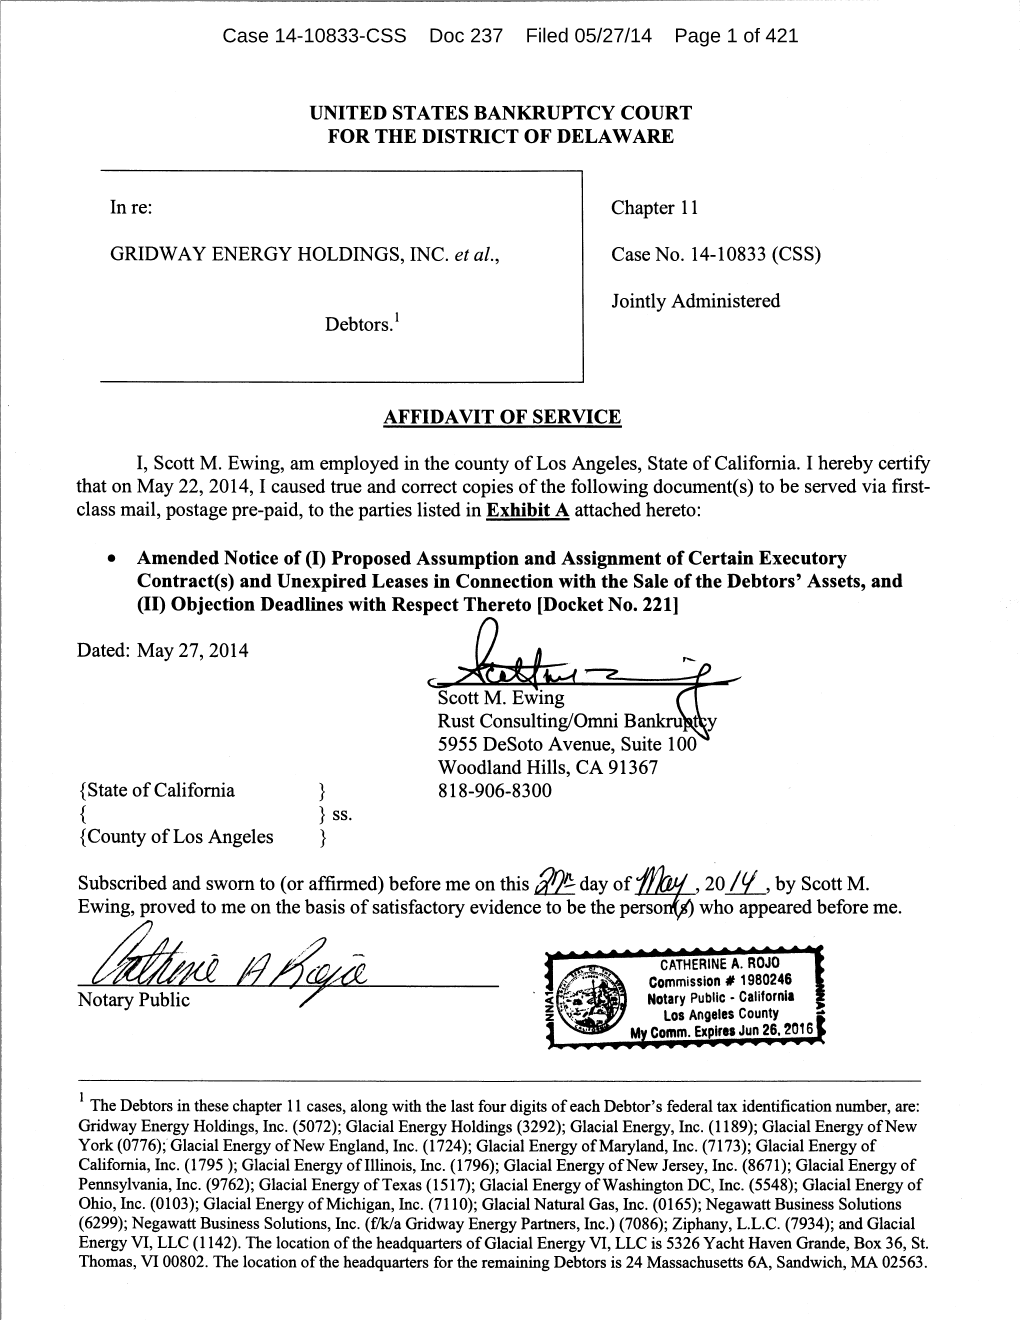 Case 14-10833-CSS Doc 237 Filed 05/27/14 Page 1 of 421 Case 14-10833-CSS Doc 237 Filed 05/27/14 Page 2 of 421